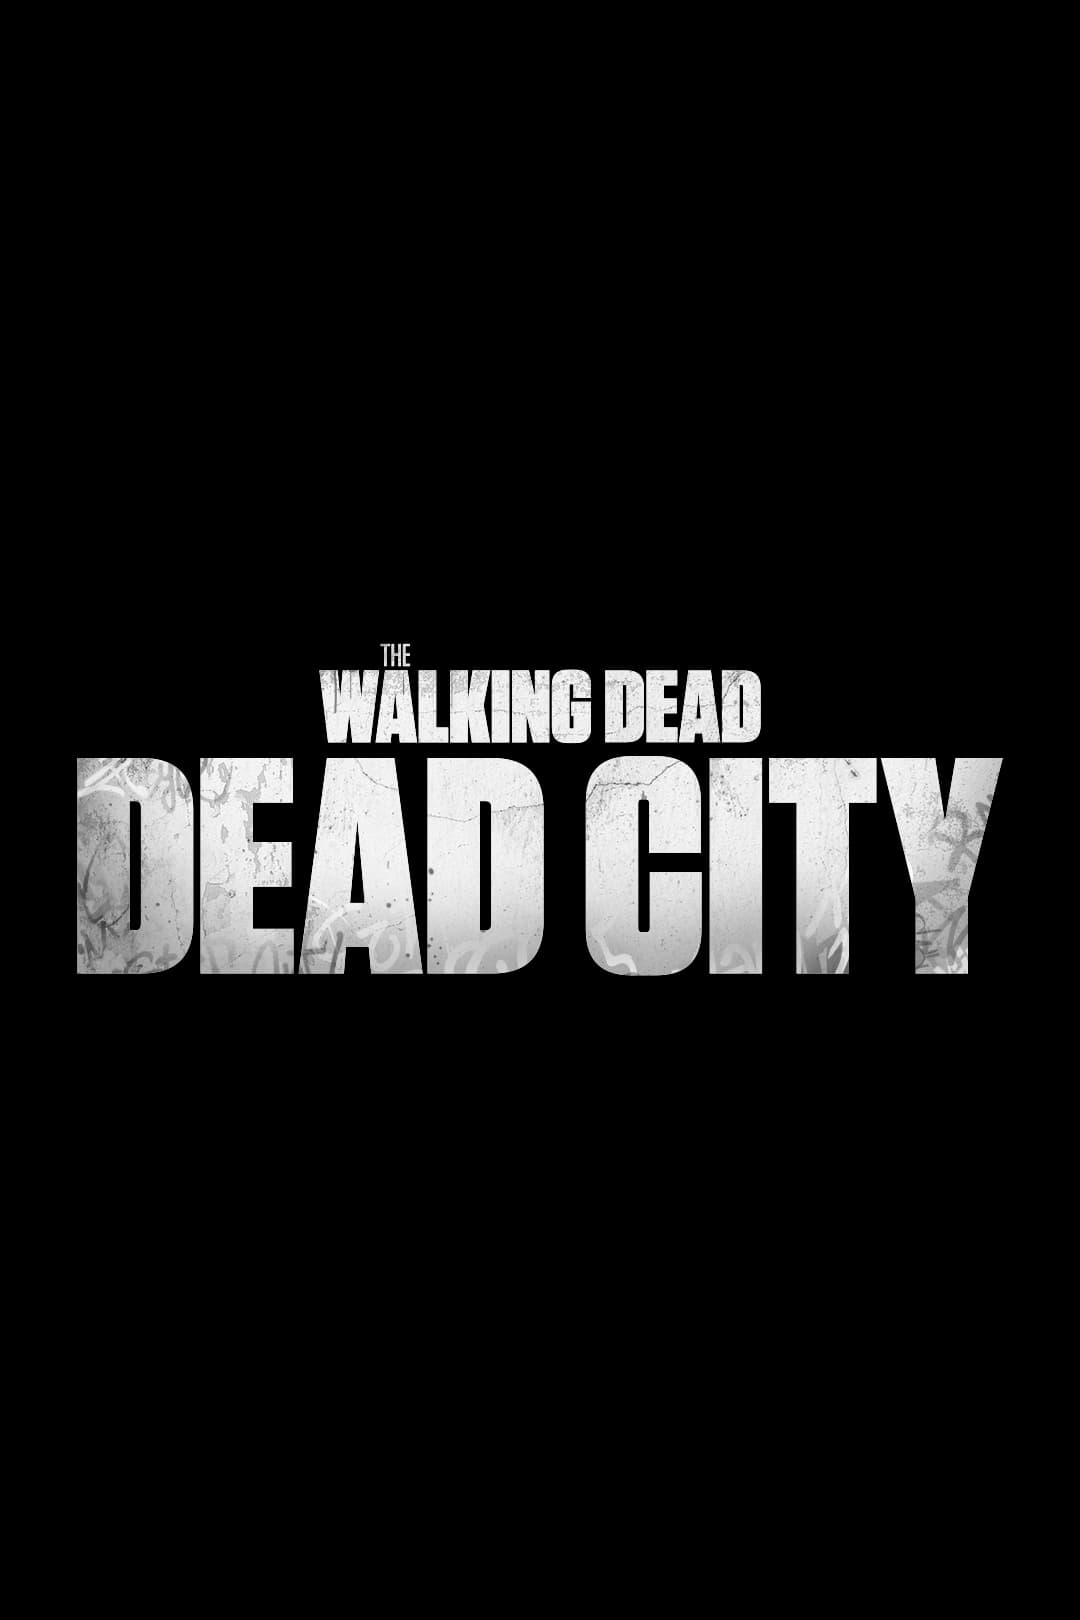 The Walking Dead Dead City (2023) The Poster Database (TPDb)